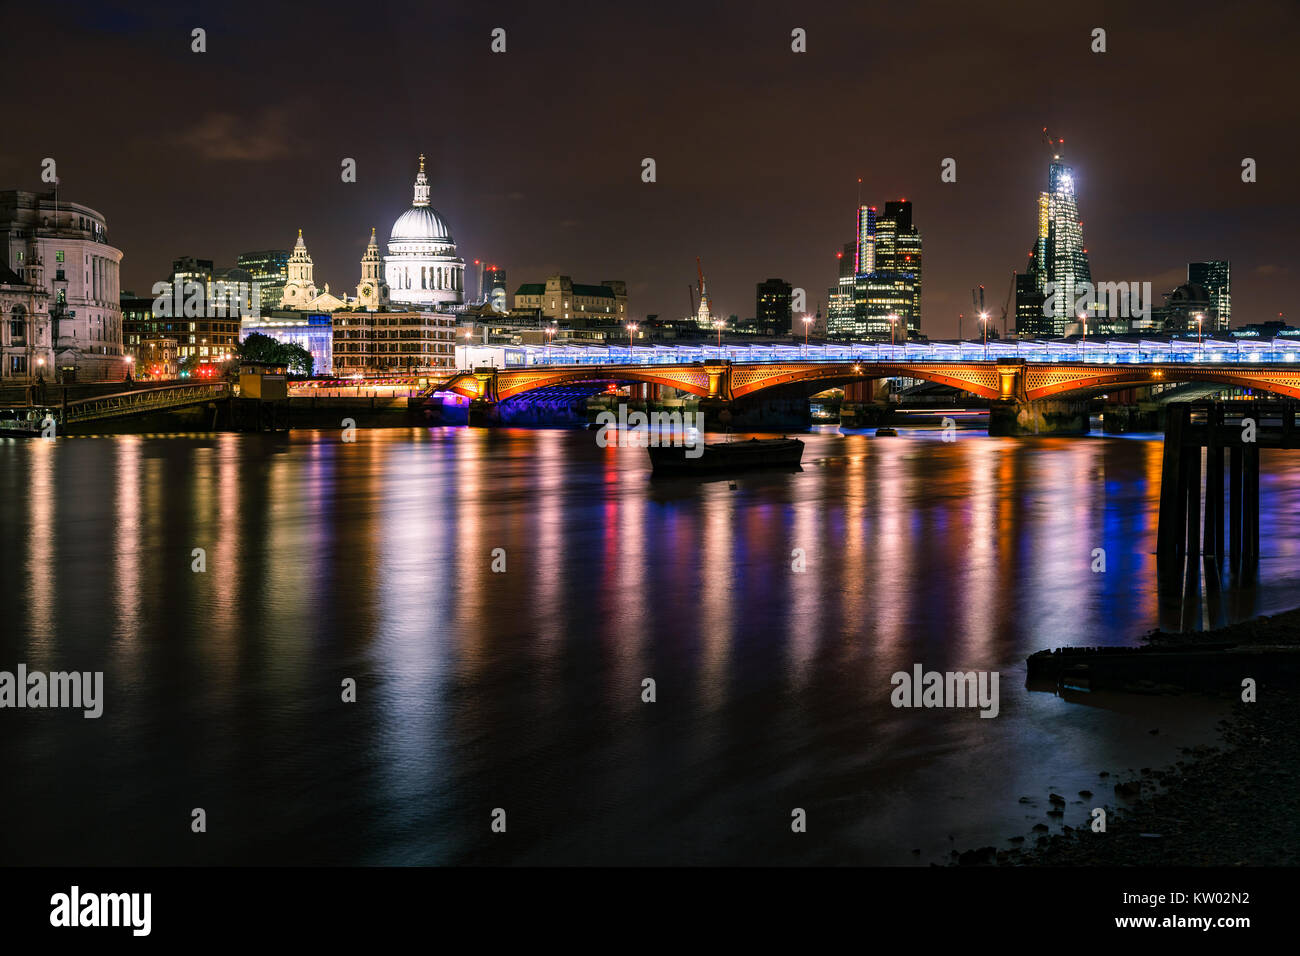 London skyline with illuminated Blackfriars Bridge over the River Thames and The St Paul's Cathedral at night Stock Photo